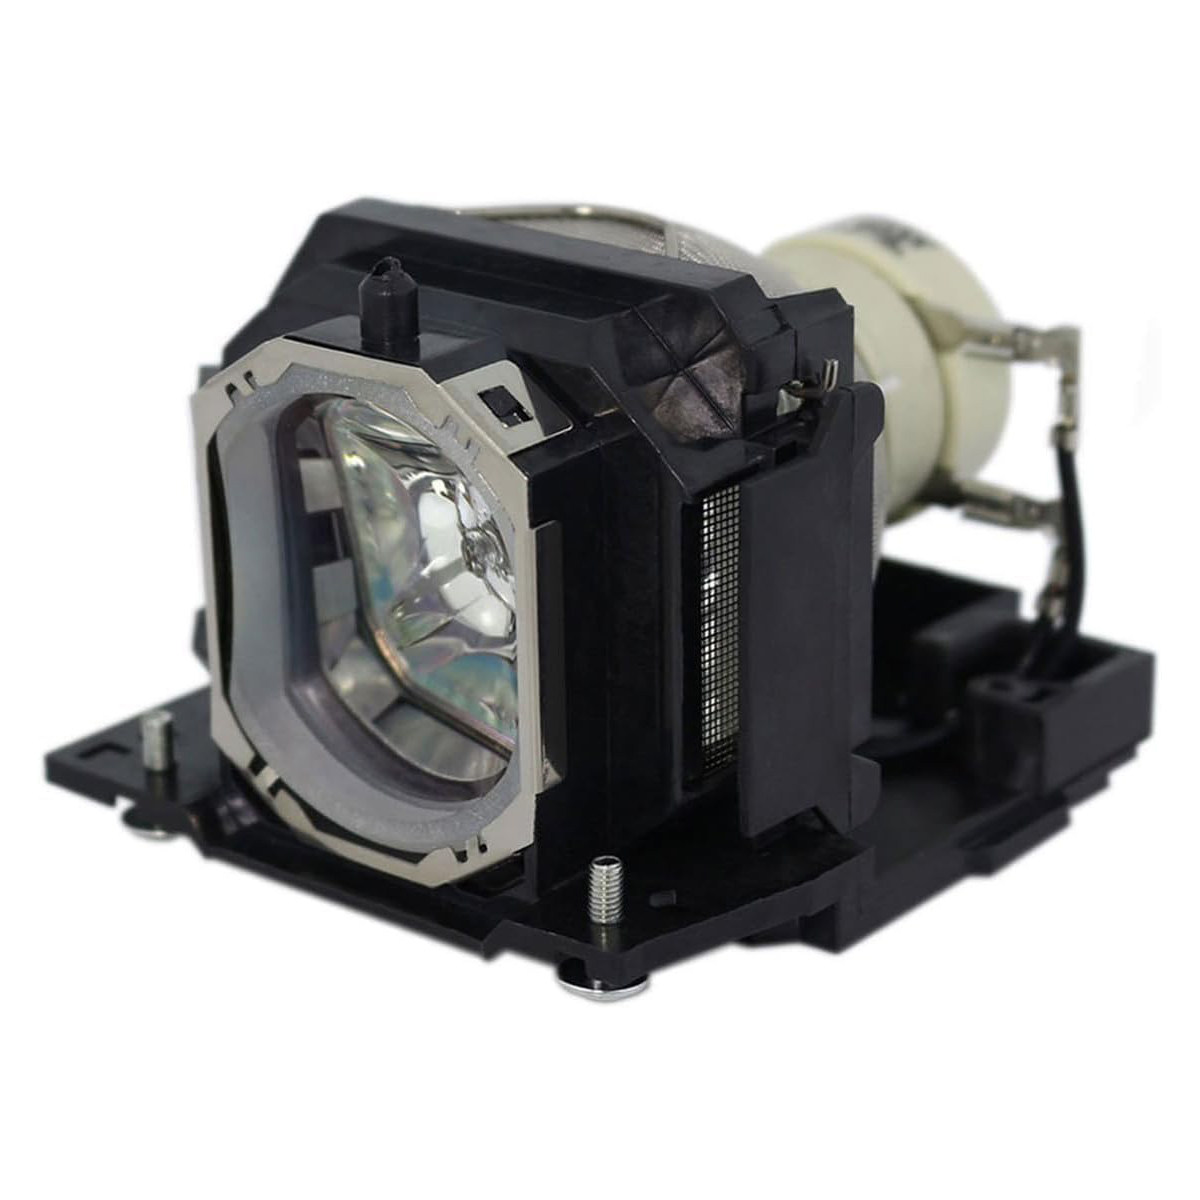 Replacement Projector lamp DT01191 For Hitachi CP-WX12WN CP-X10WN CP-X2021